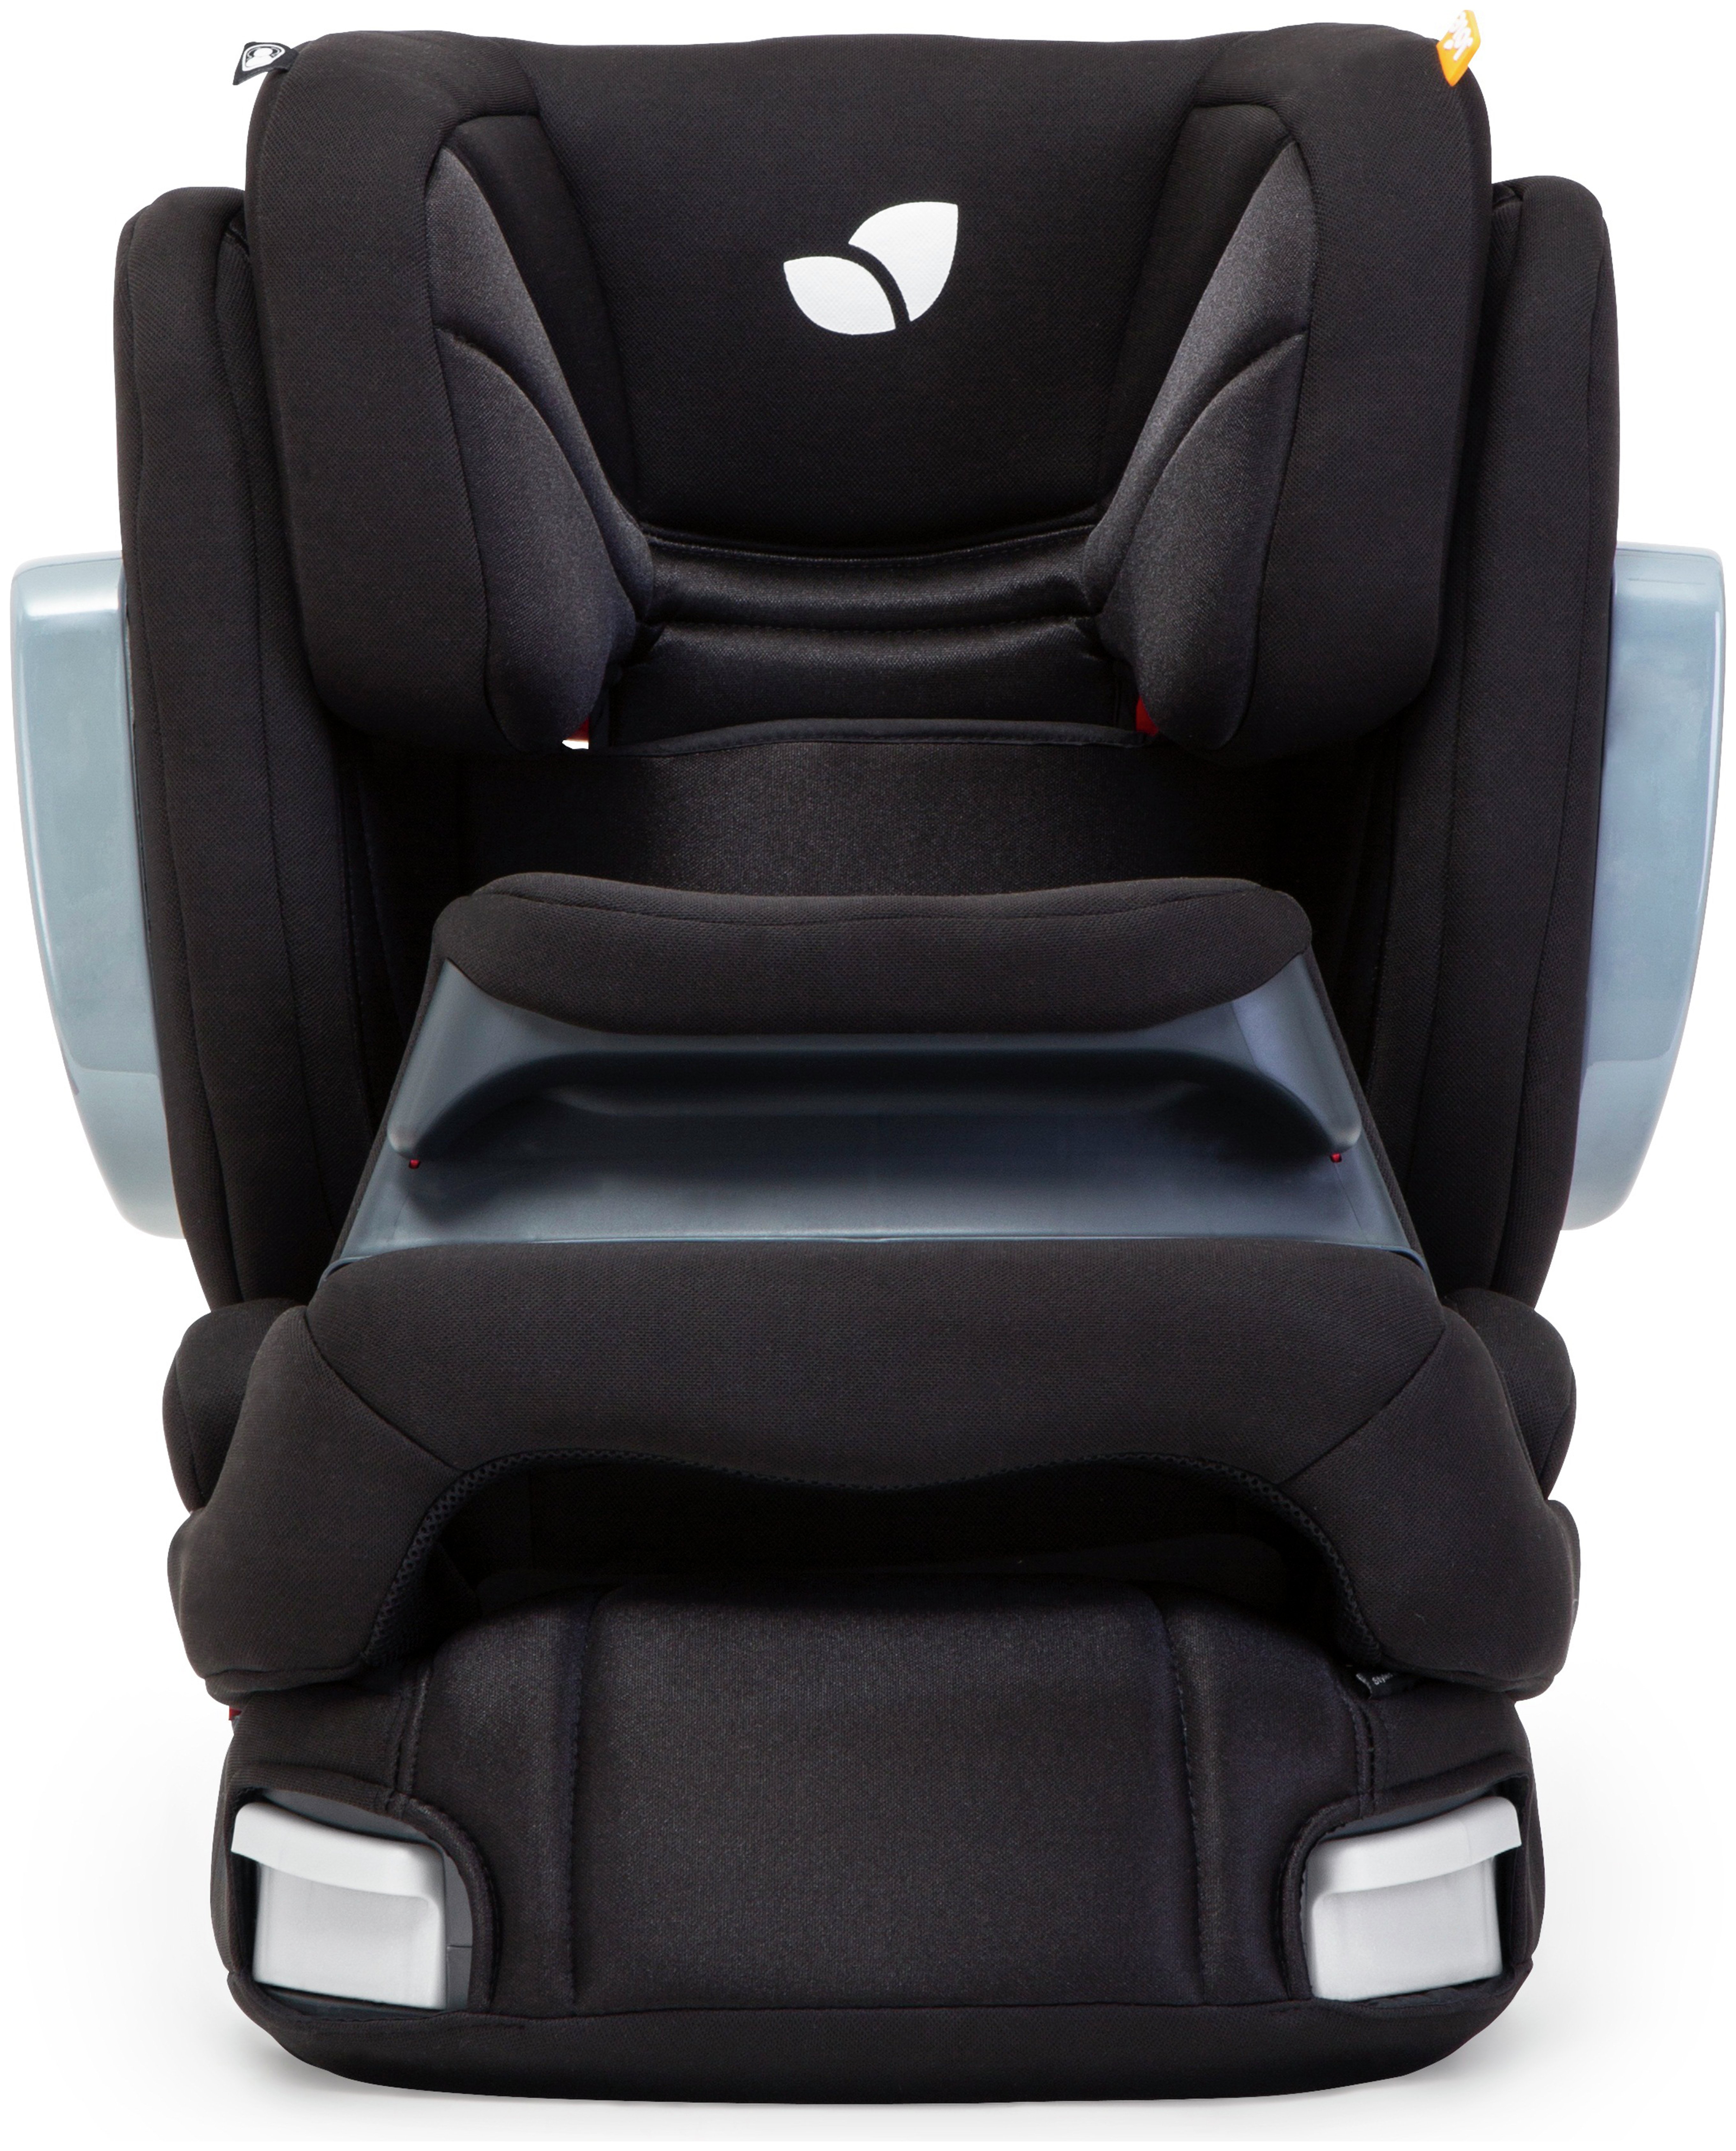 Joie Trillo Shield Group 1-2-3 Car Seat